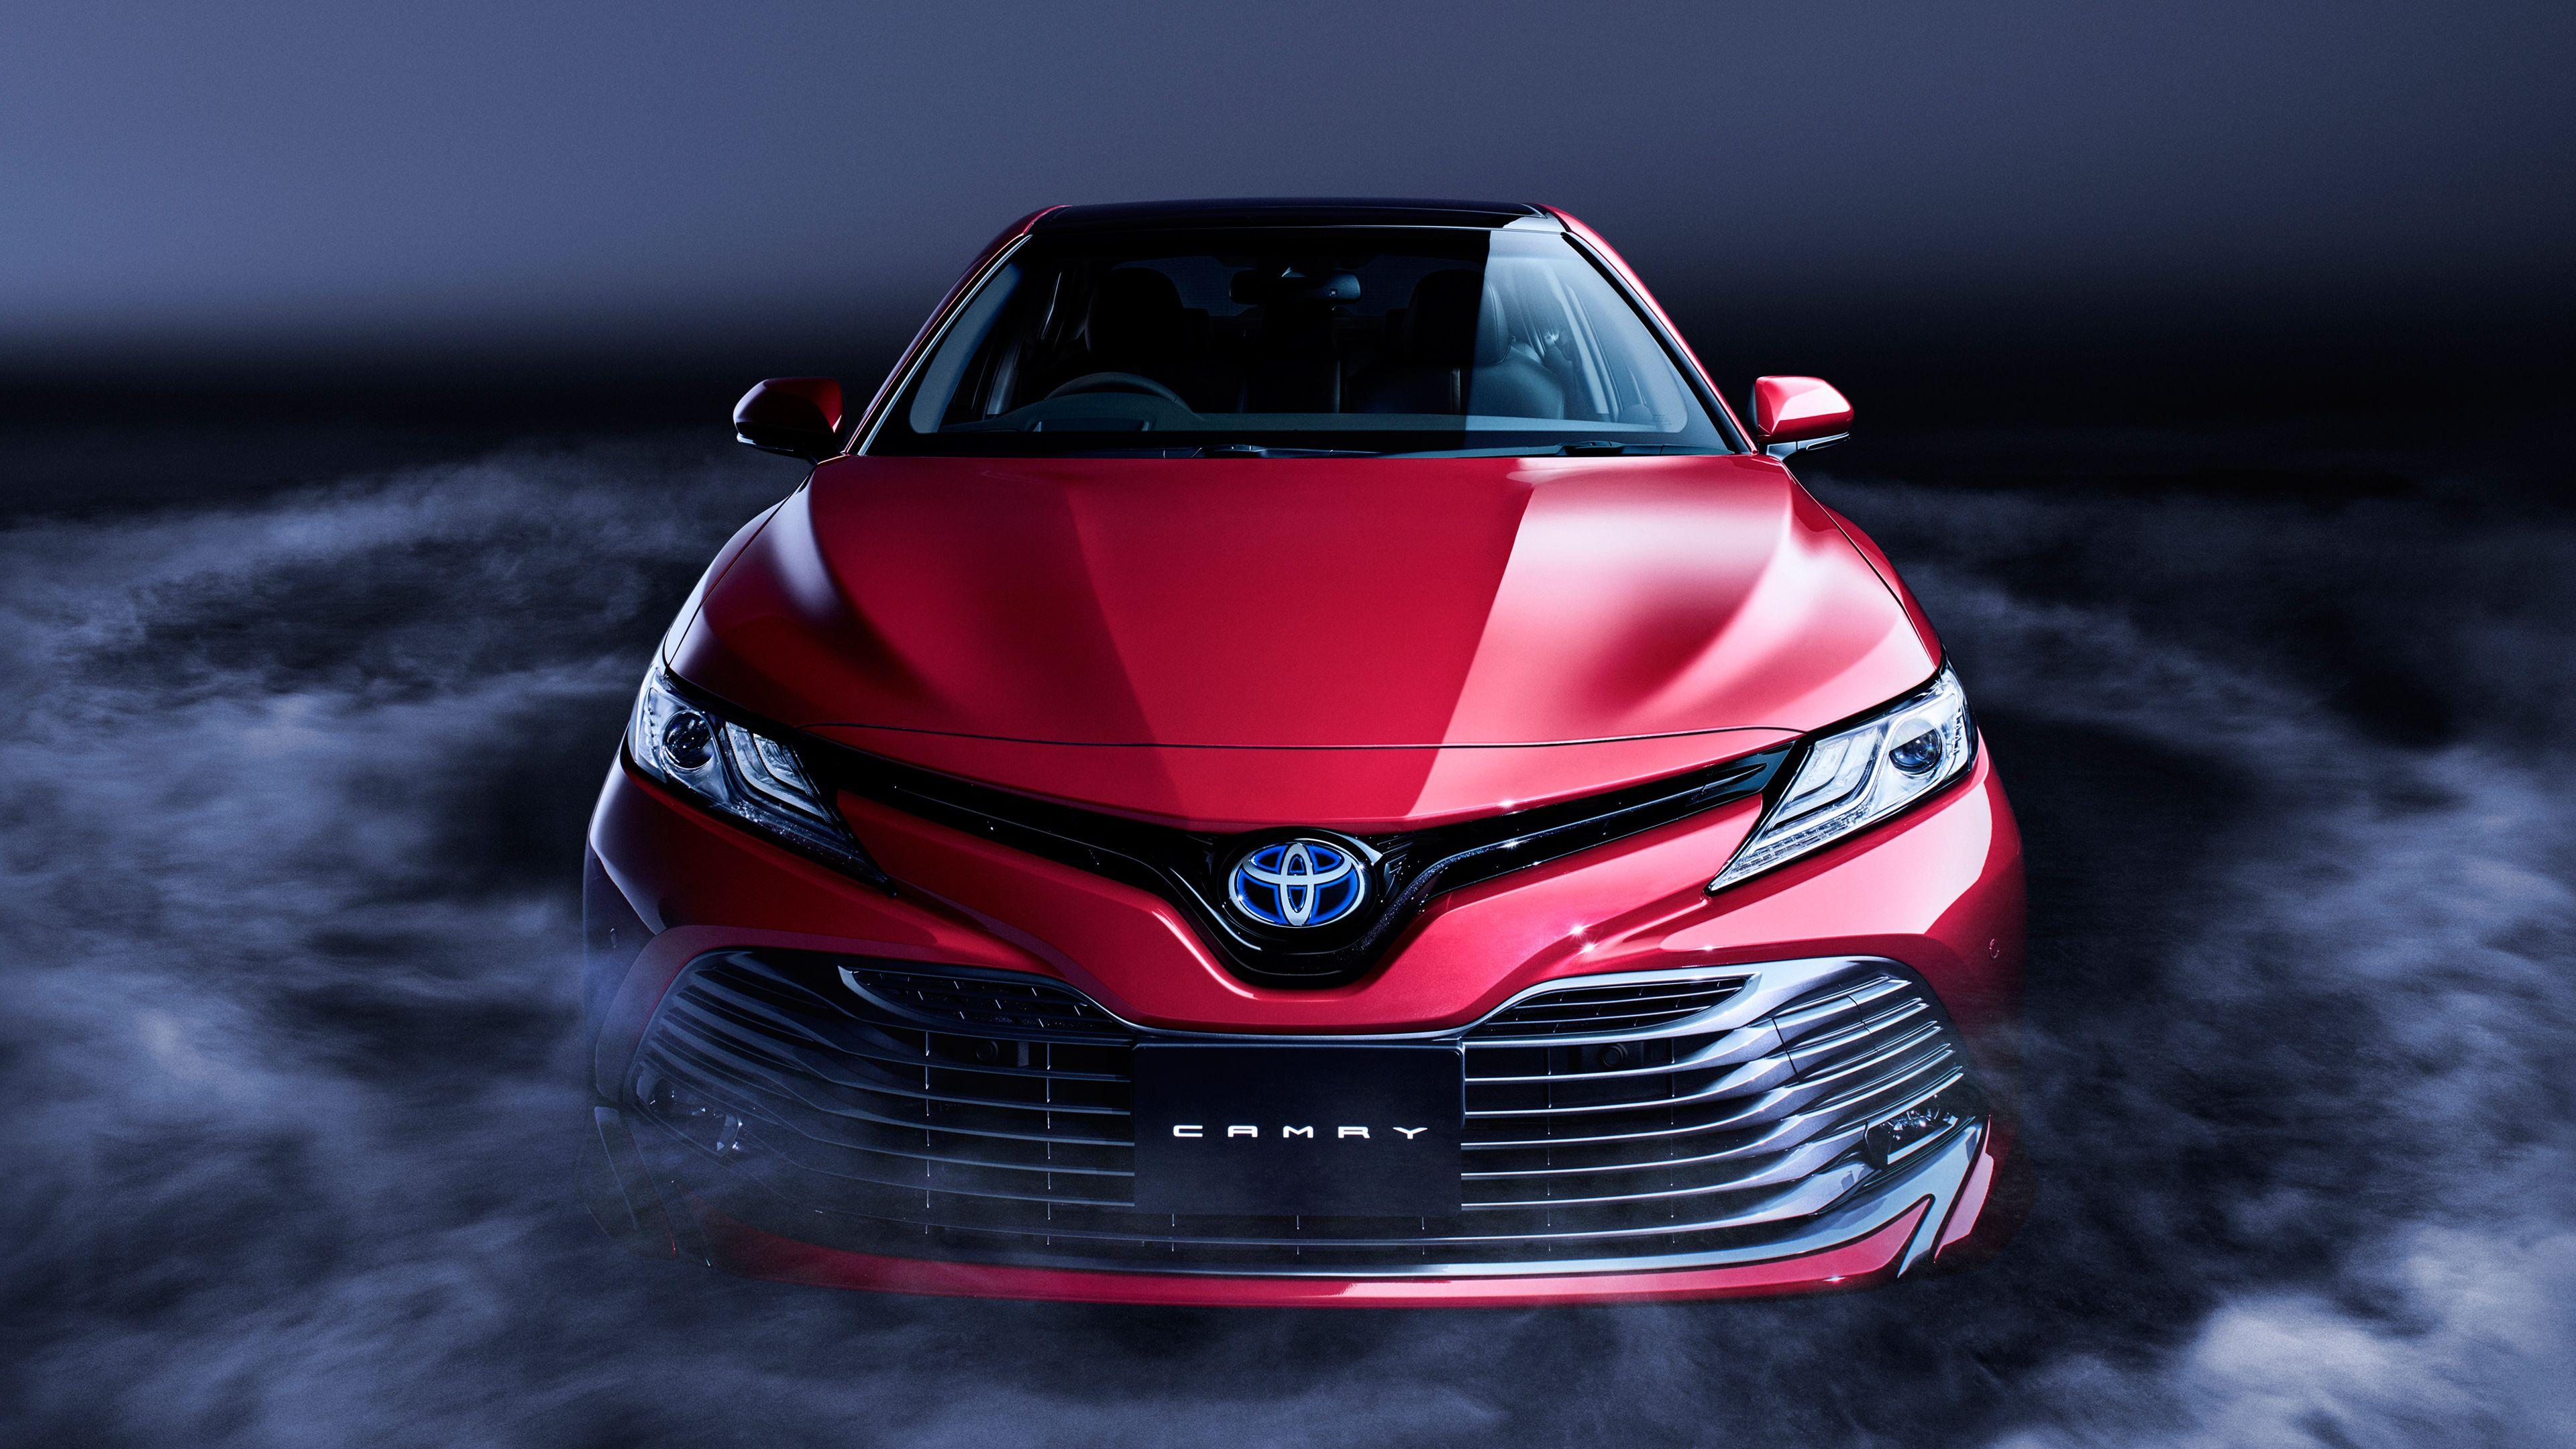 Toyota Camry 2018 4k, HD Cars, 4k Wallpaper, Image, Background